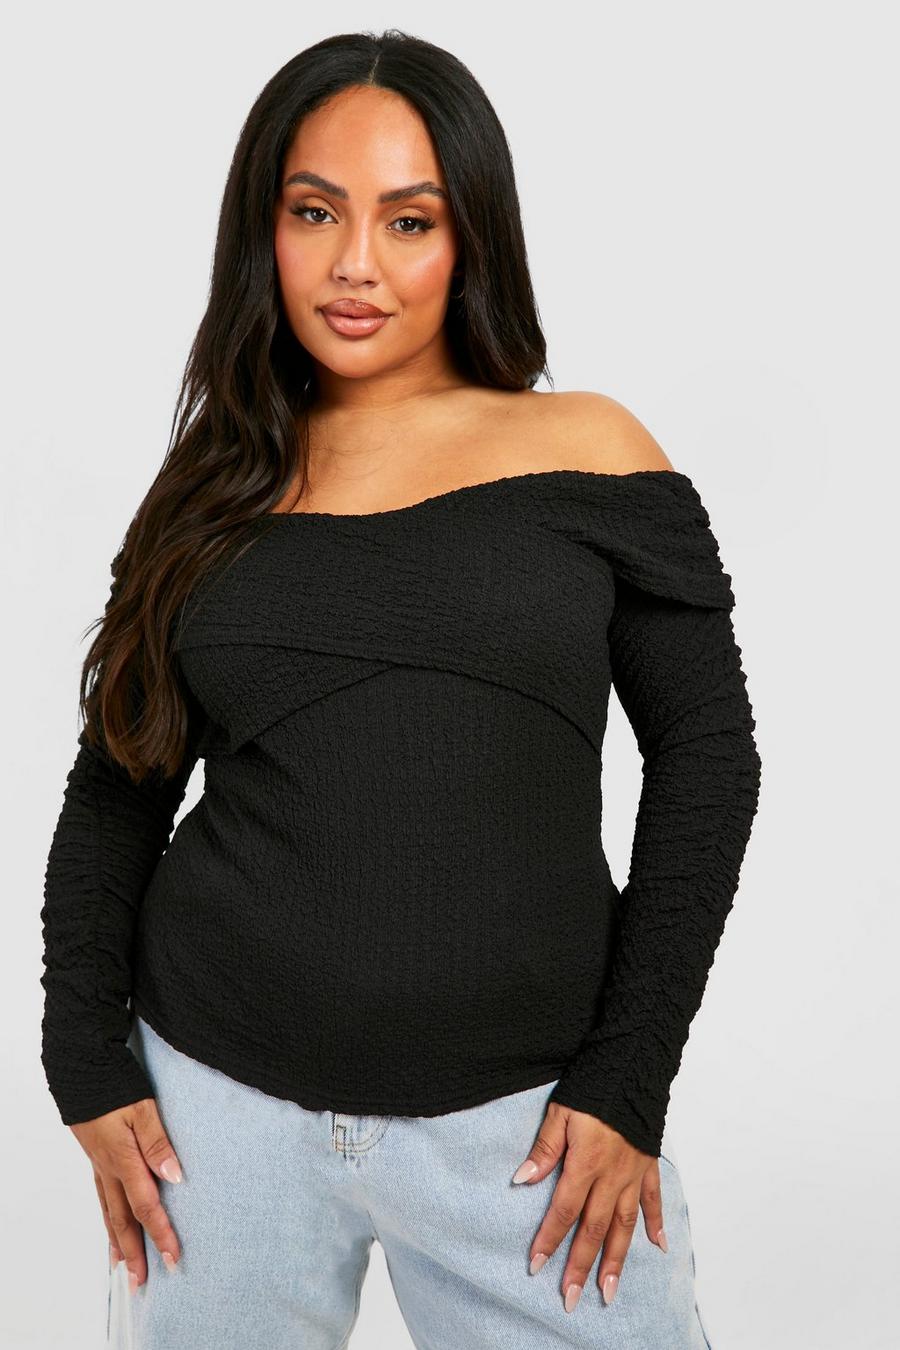 Nike Plus Textured Ruched Sleeve Top